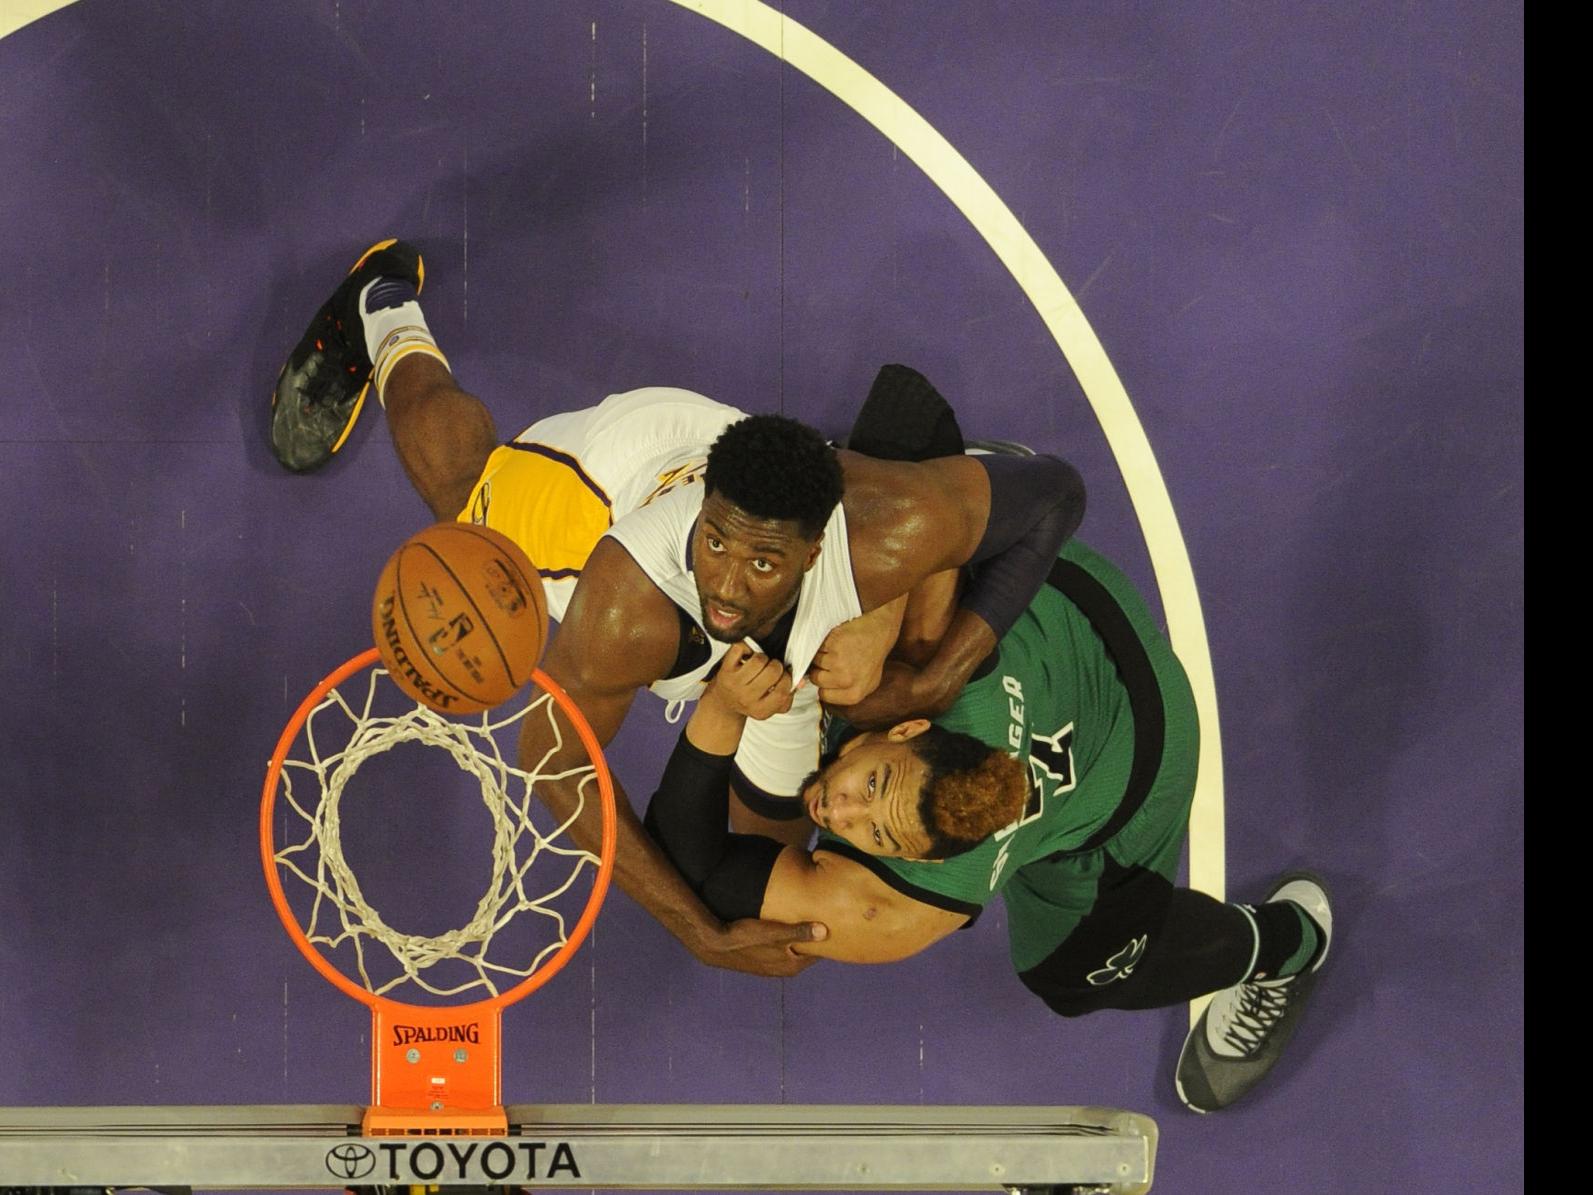 Lakers clinch championship over Celtics